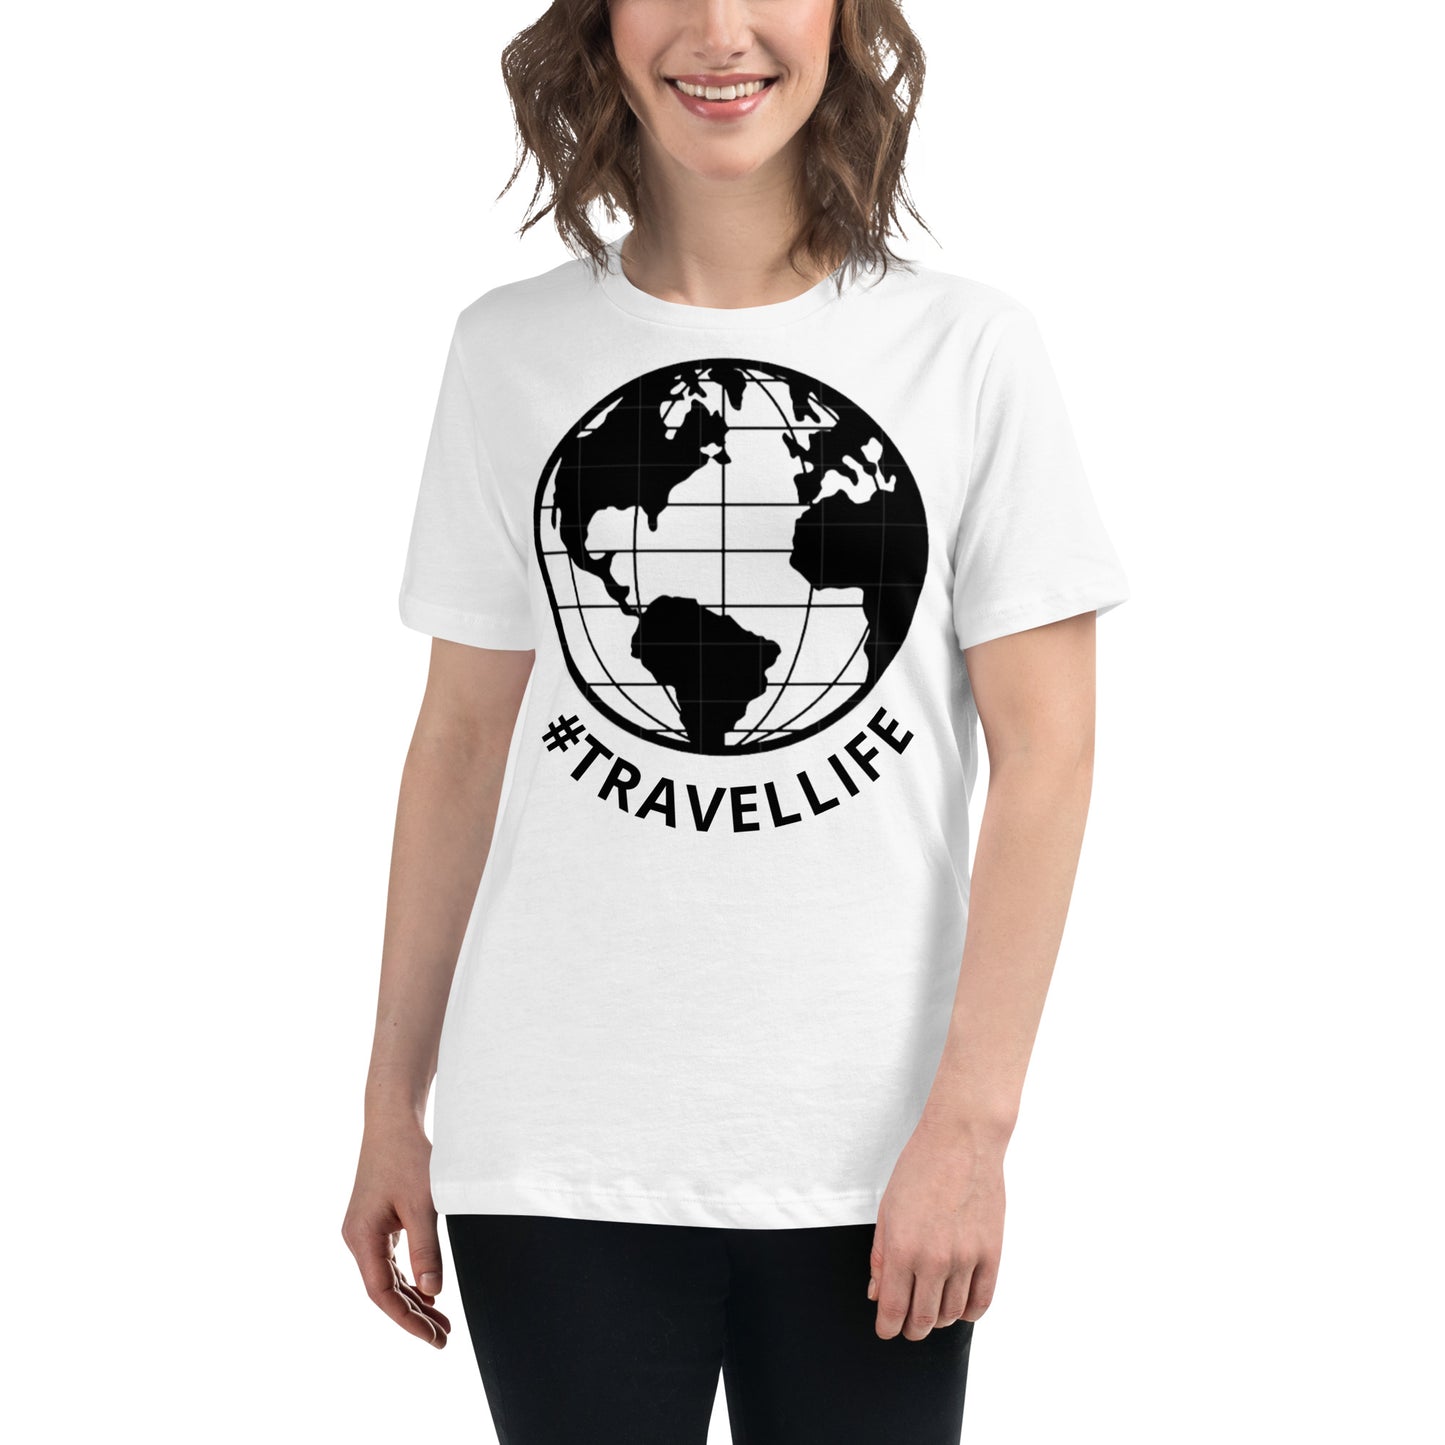 #Travellife World Women's White Relaxed T-Shirt Large Black Text